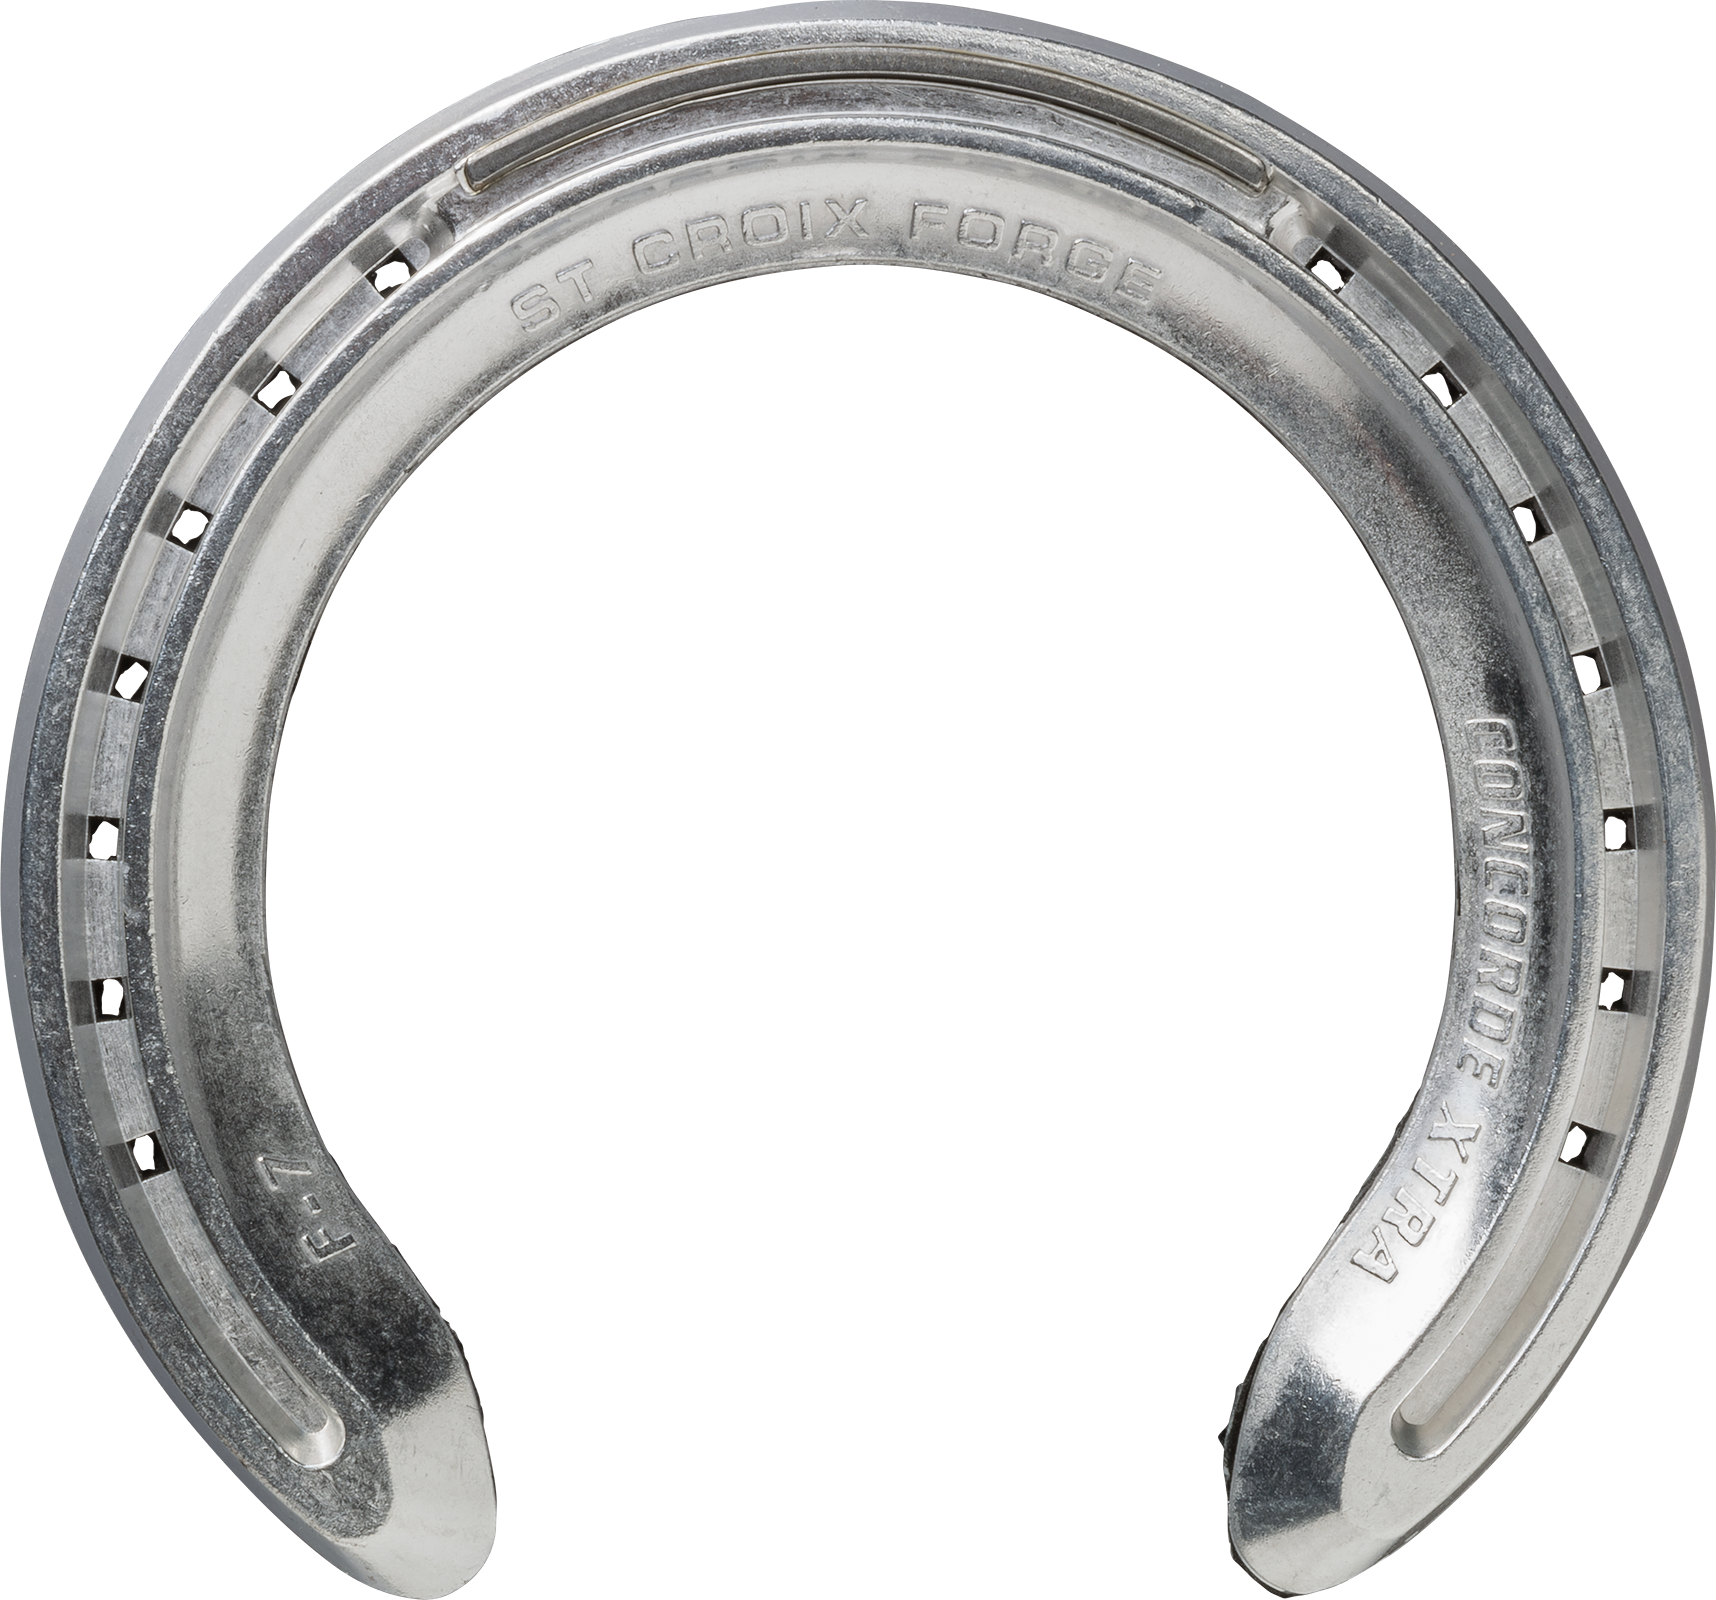 St. Croix Concorde Extra Air horseshoes, bottom side